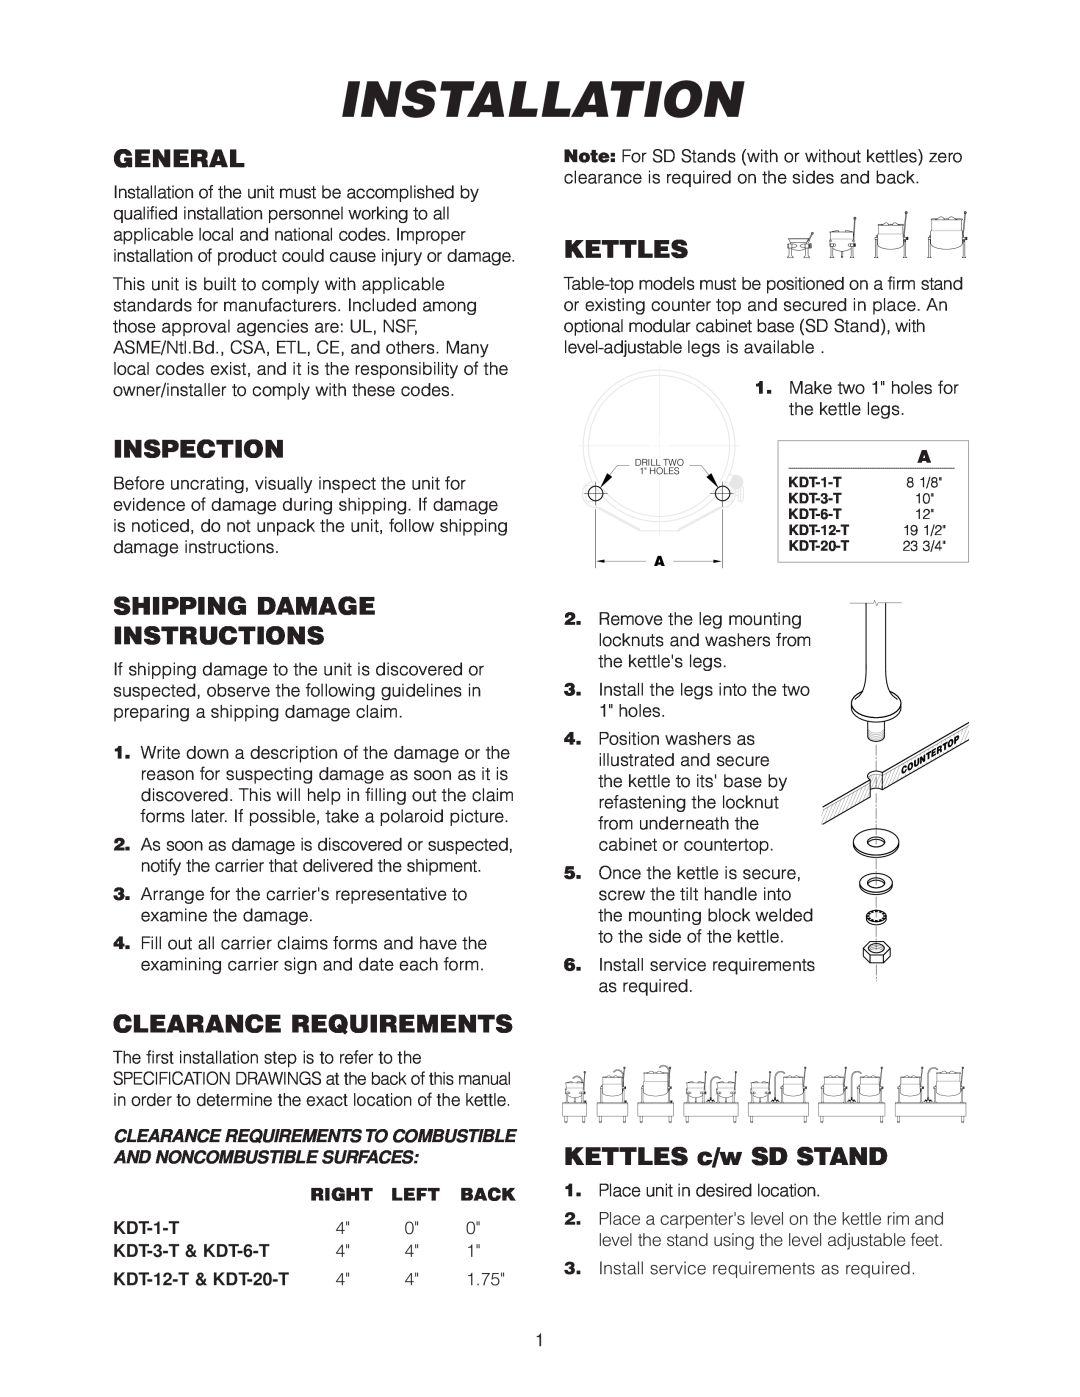 Cleveland Range SD- 650 Installation, General, Inspection, Shipping Damage Instructions, Clearance Requirements, Kettles 